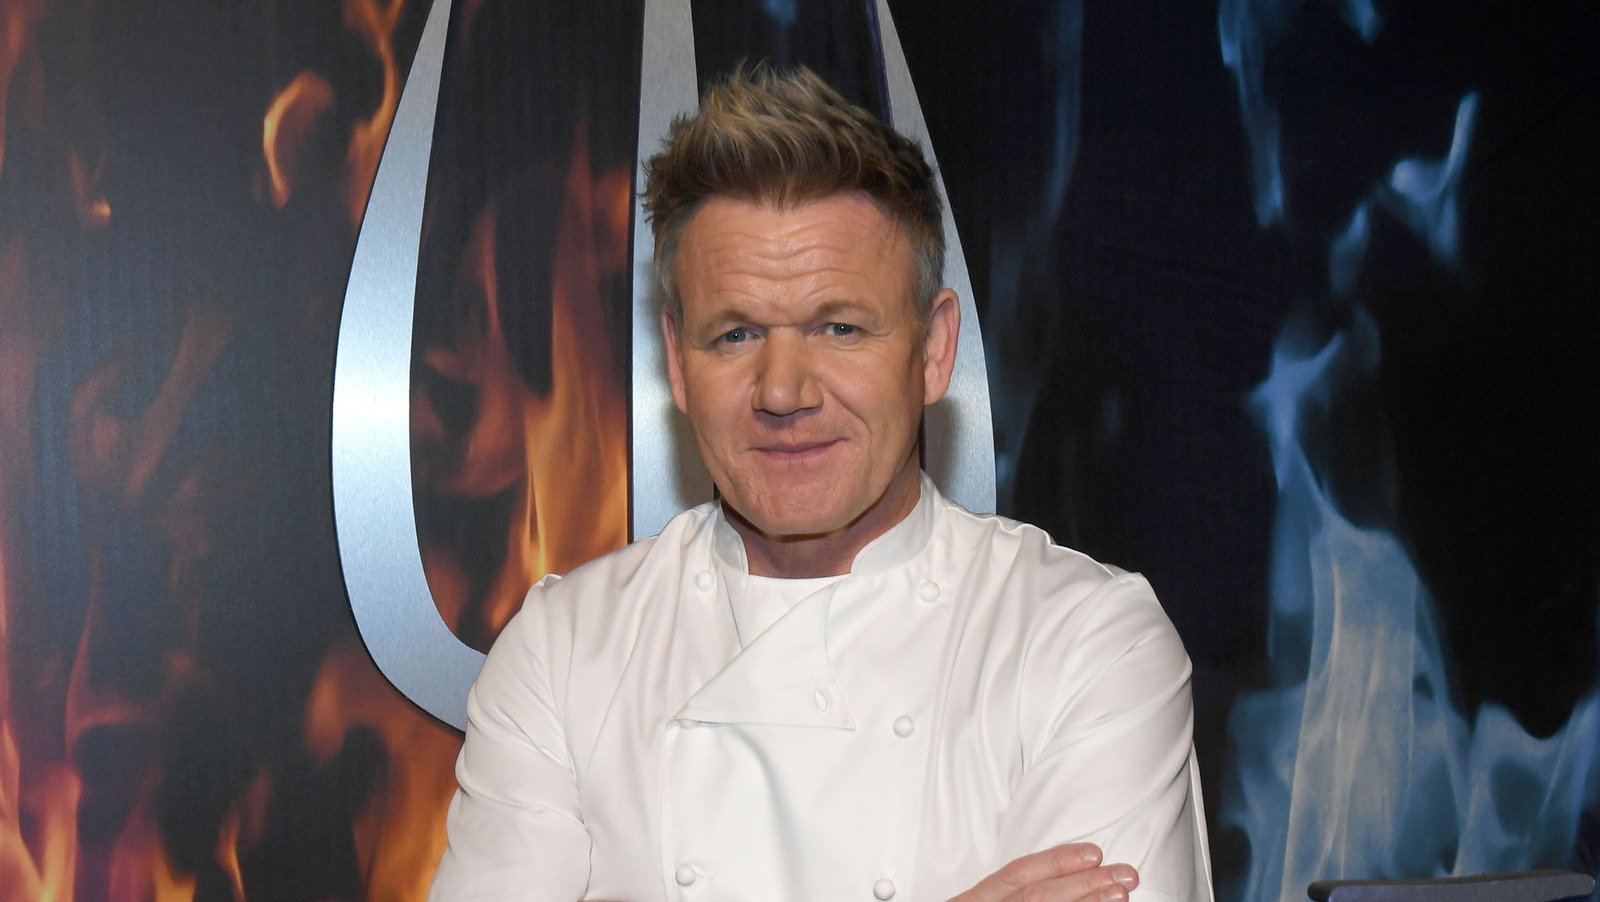 What Working With Gordon Ramsay Is Really Like, According To Chefs